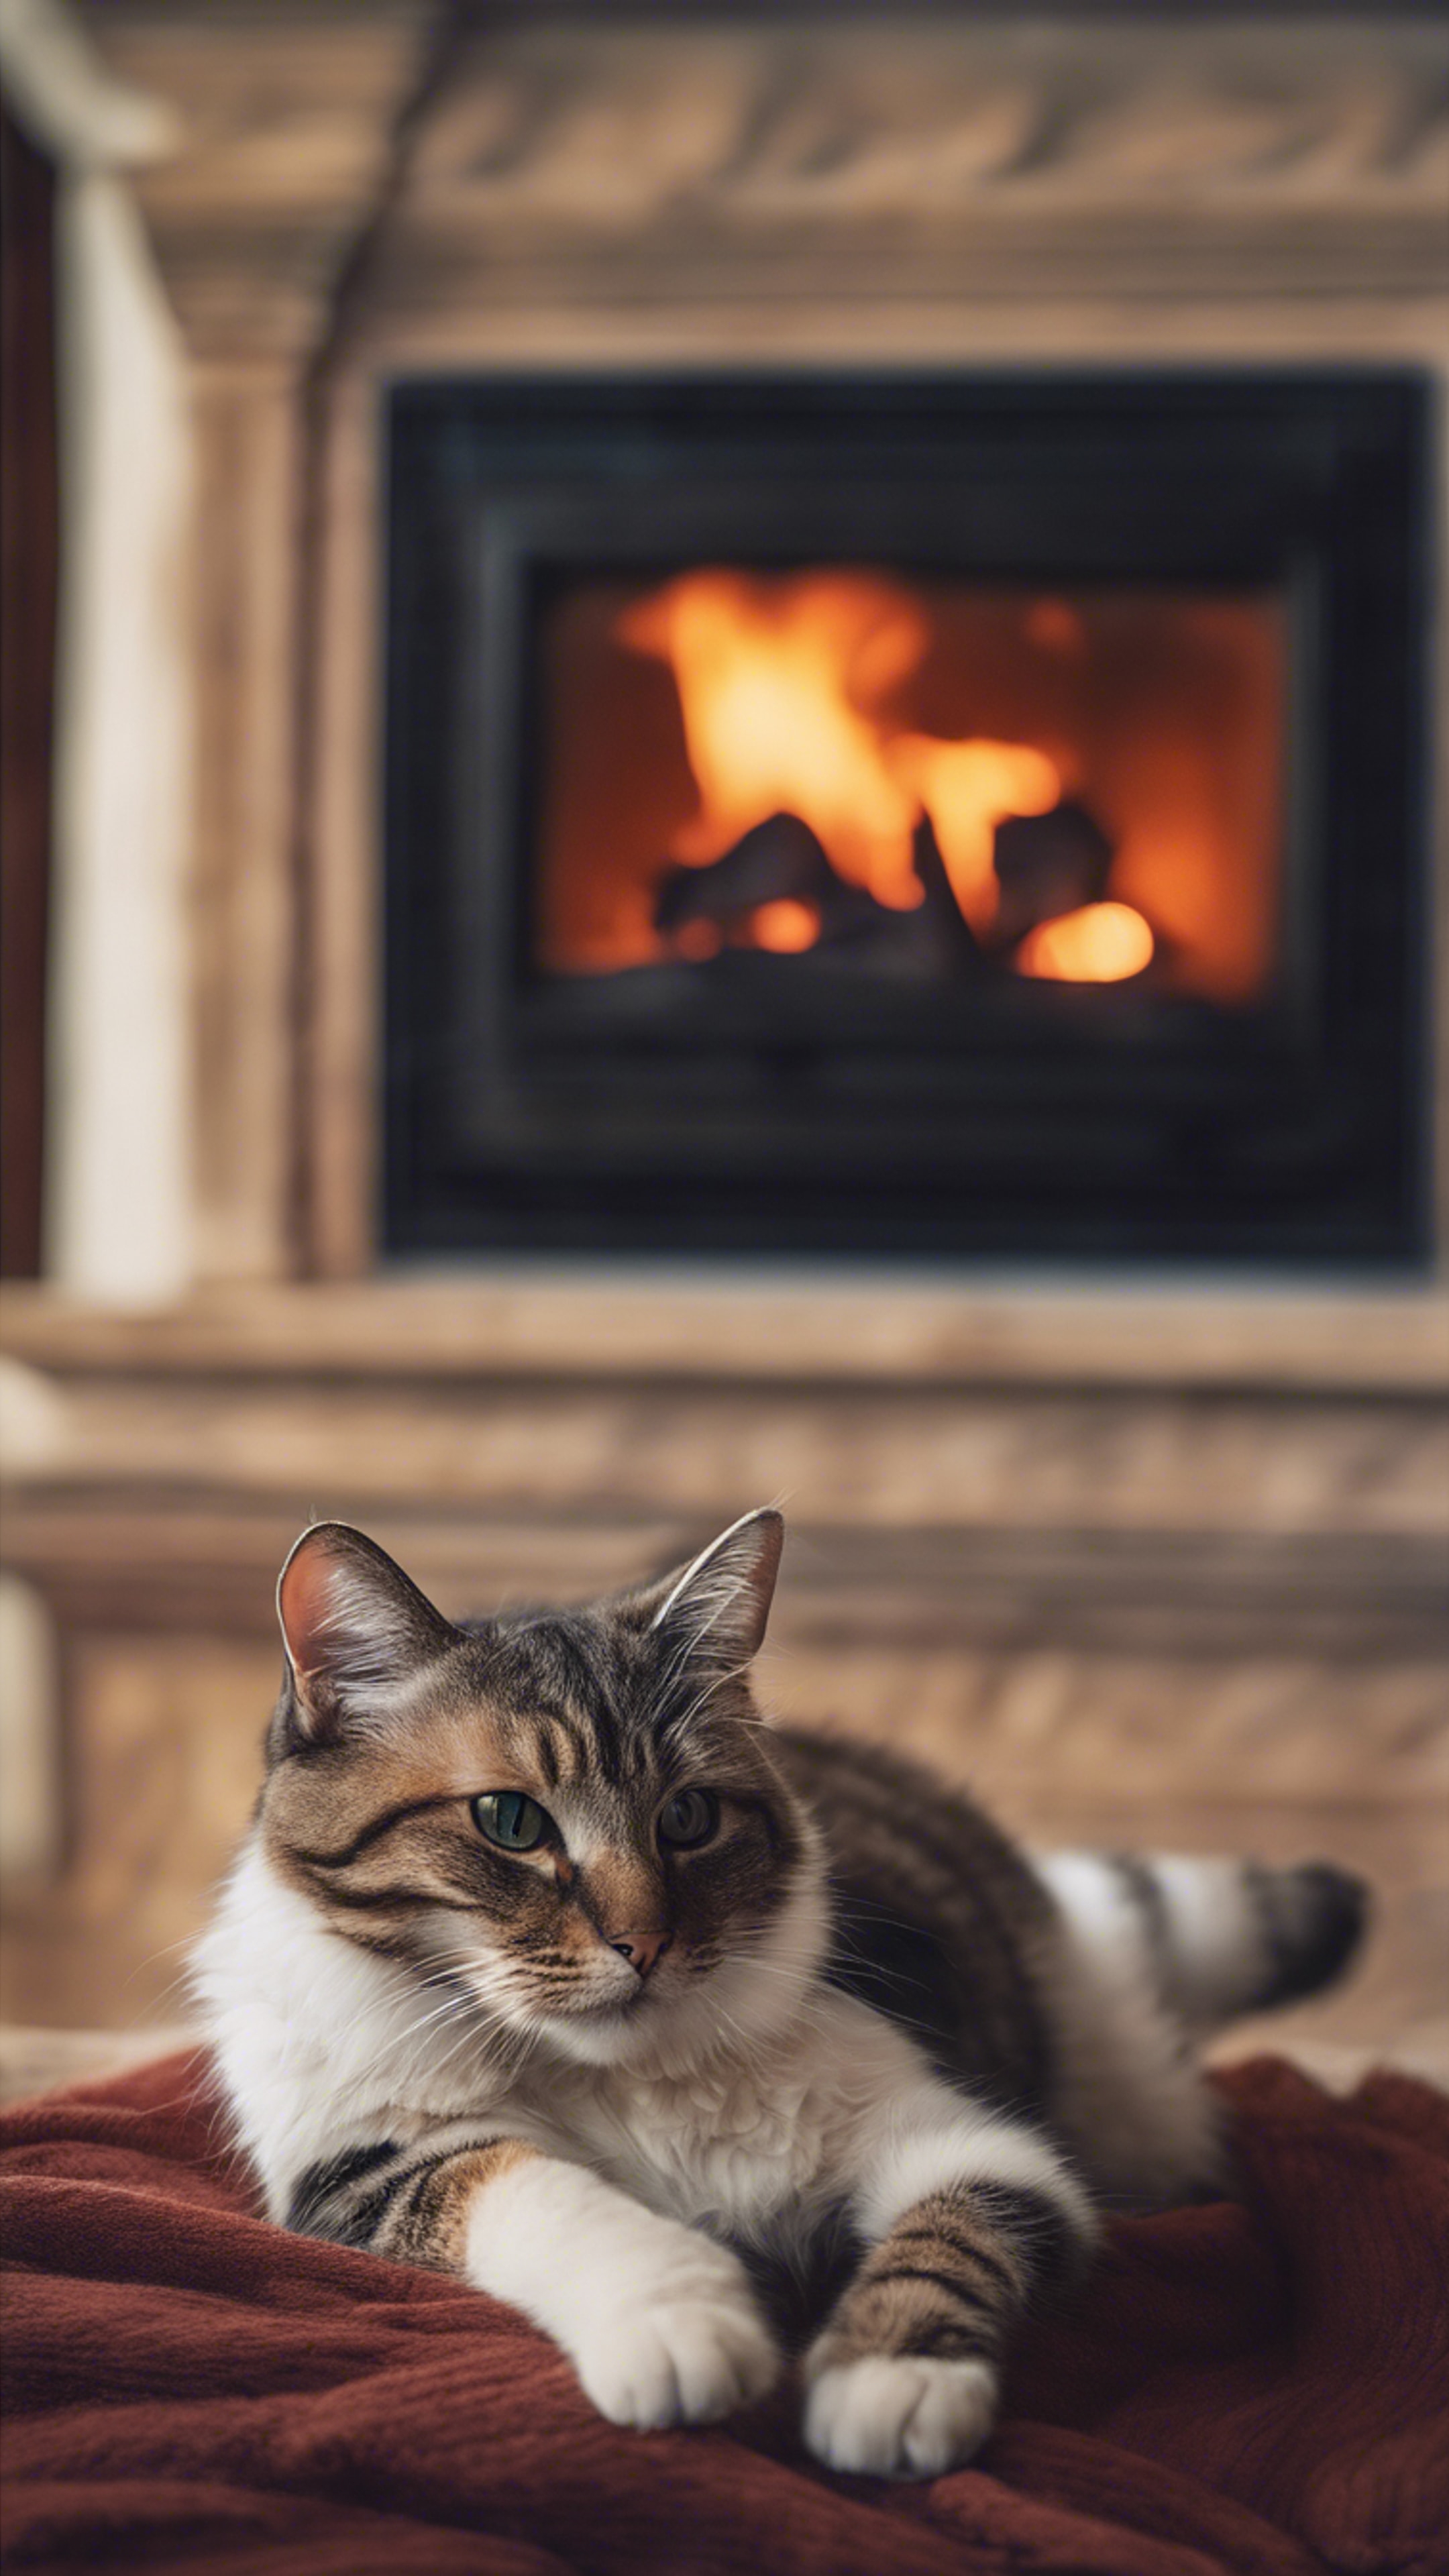 A cat lounging in front of a roaring fireplace, completely mesmerized by the flickering flames. Fondo de pantalla[f30d5ca7e04c497dade0]